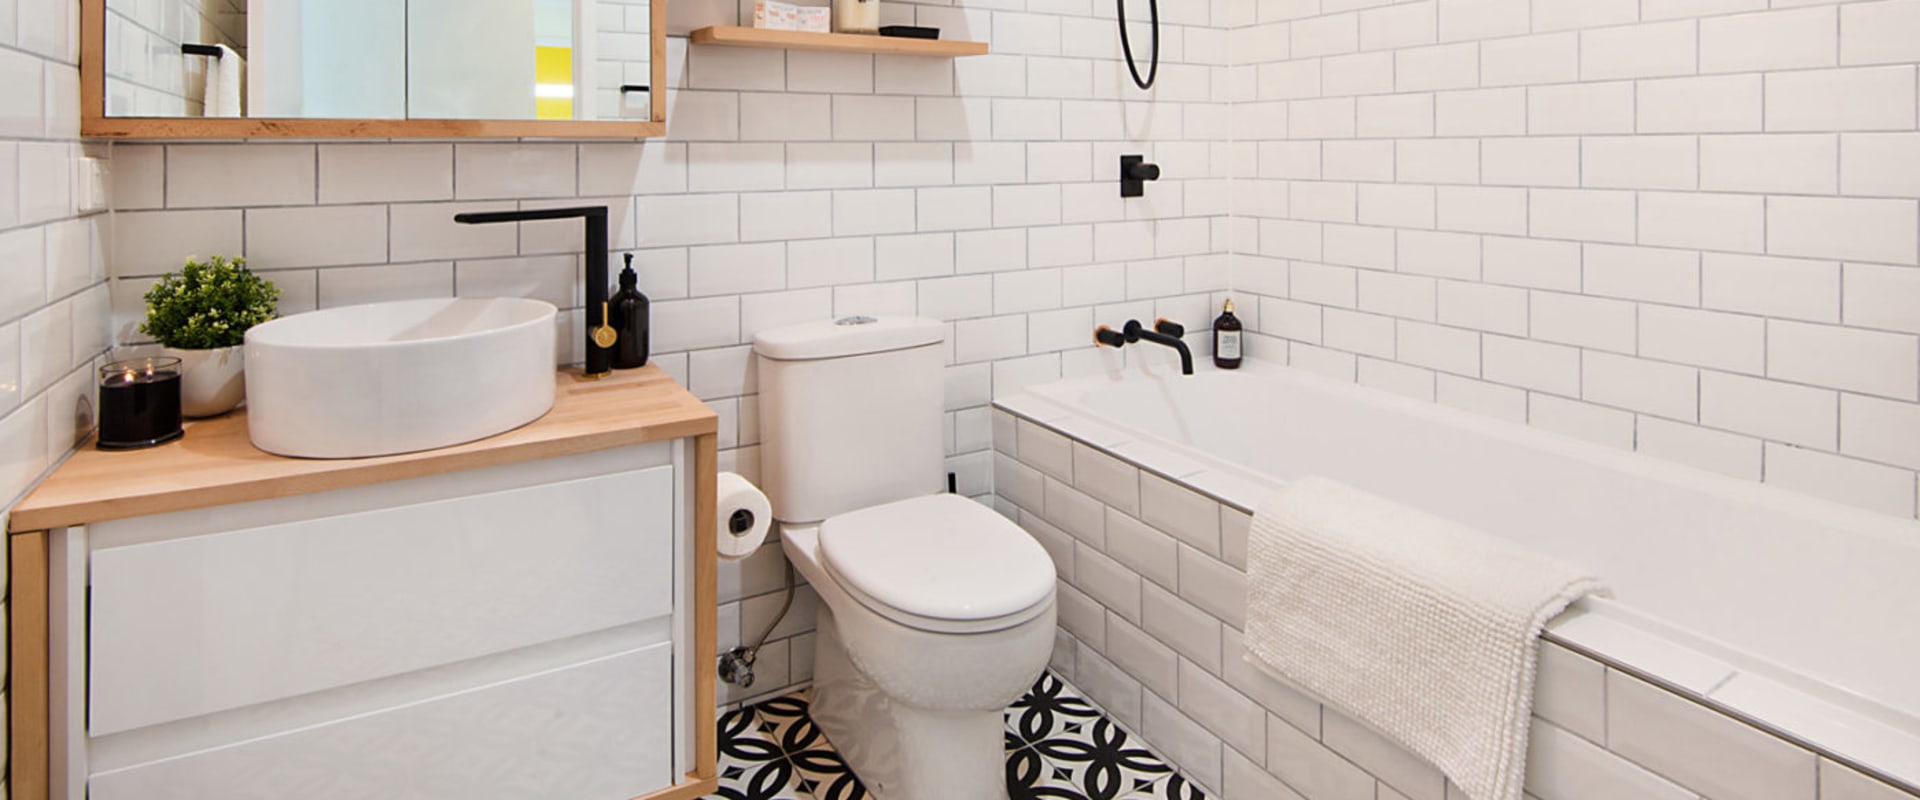 The Expert's Guide to Planning a Successful Bathroom Remodel